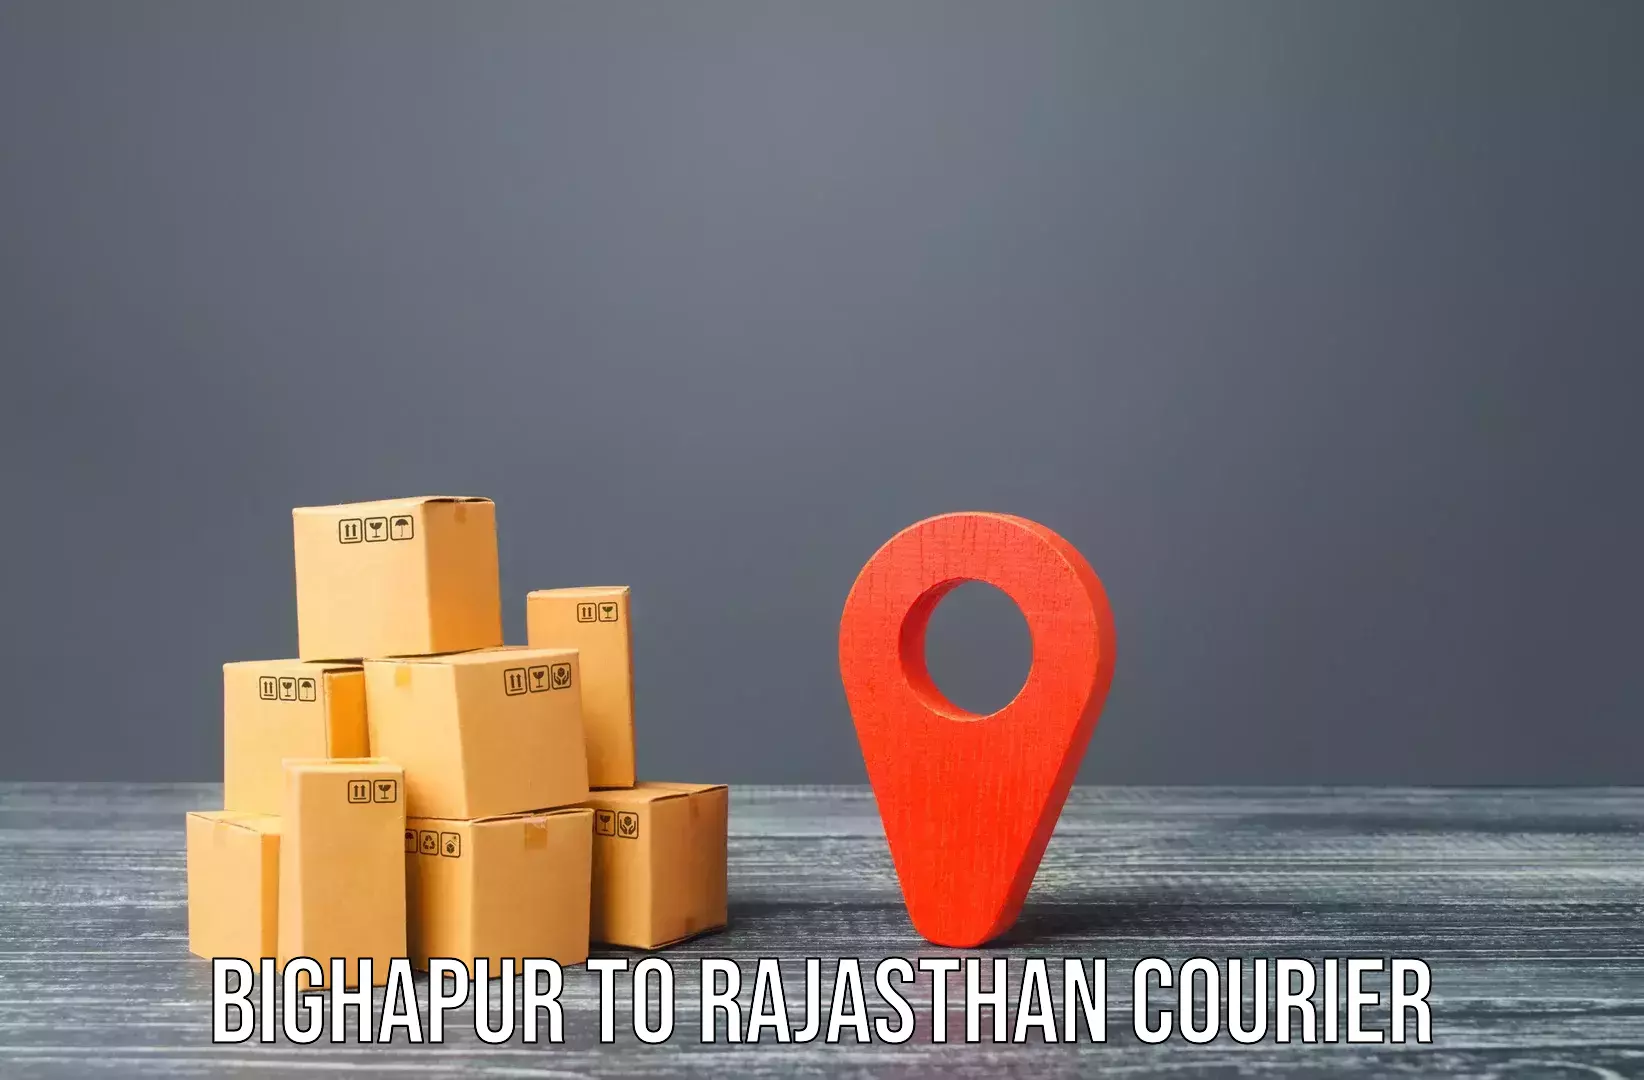 Trusted relocation experts Bighapur to Sojat